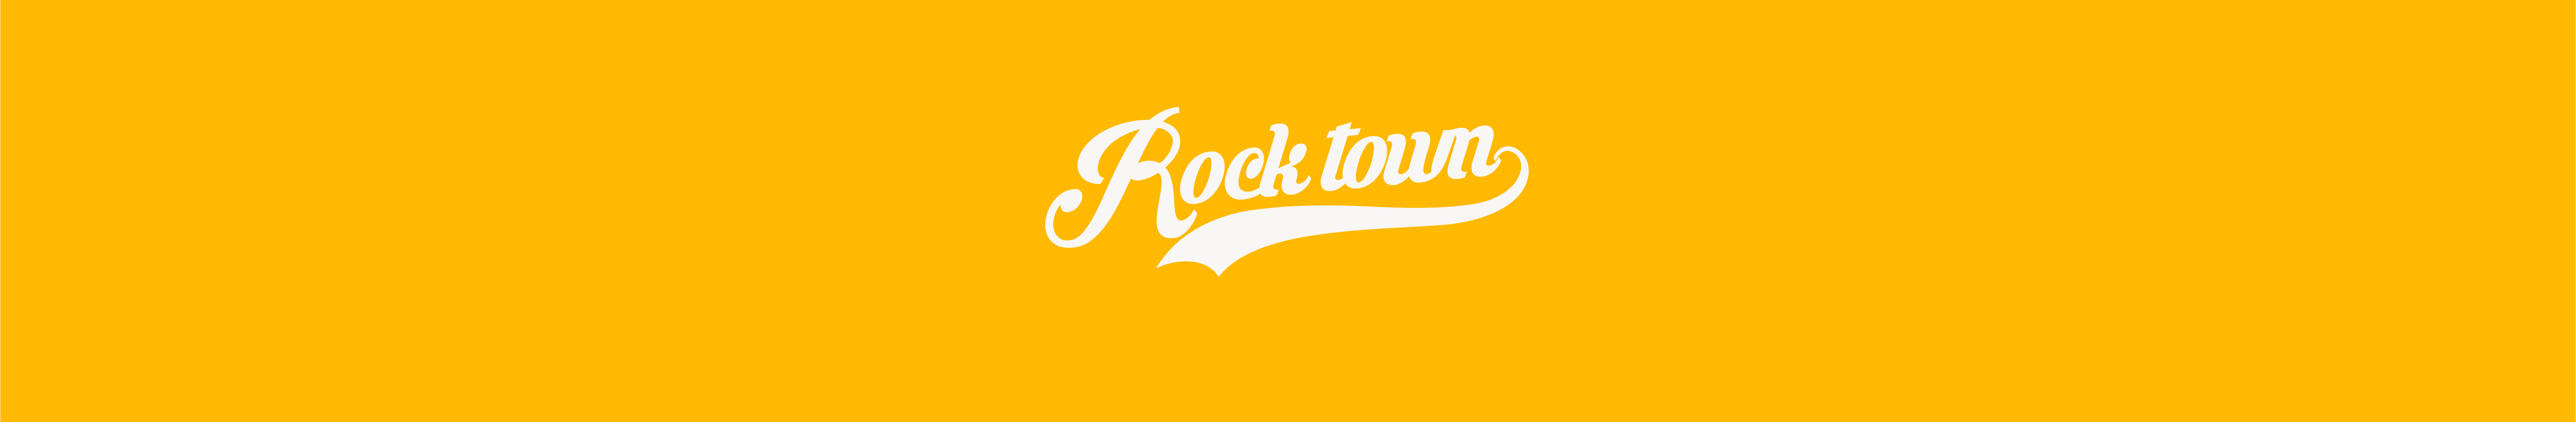 Rock Town's profile banner